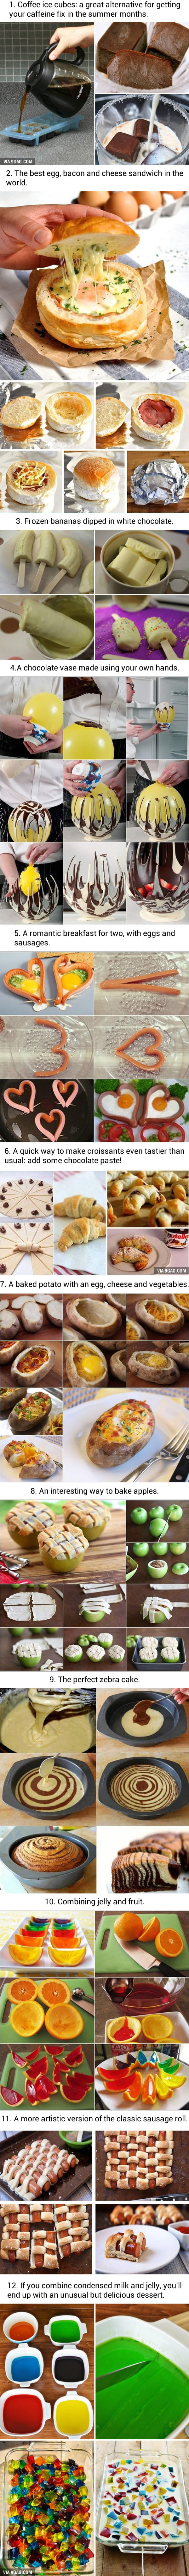 12 food that you can make a whole lot tastier